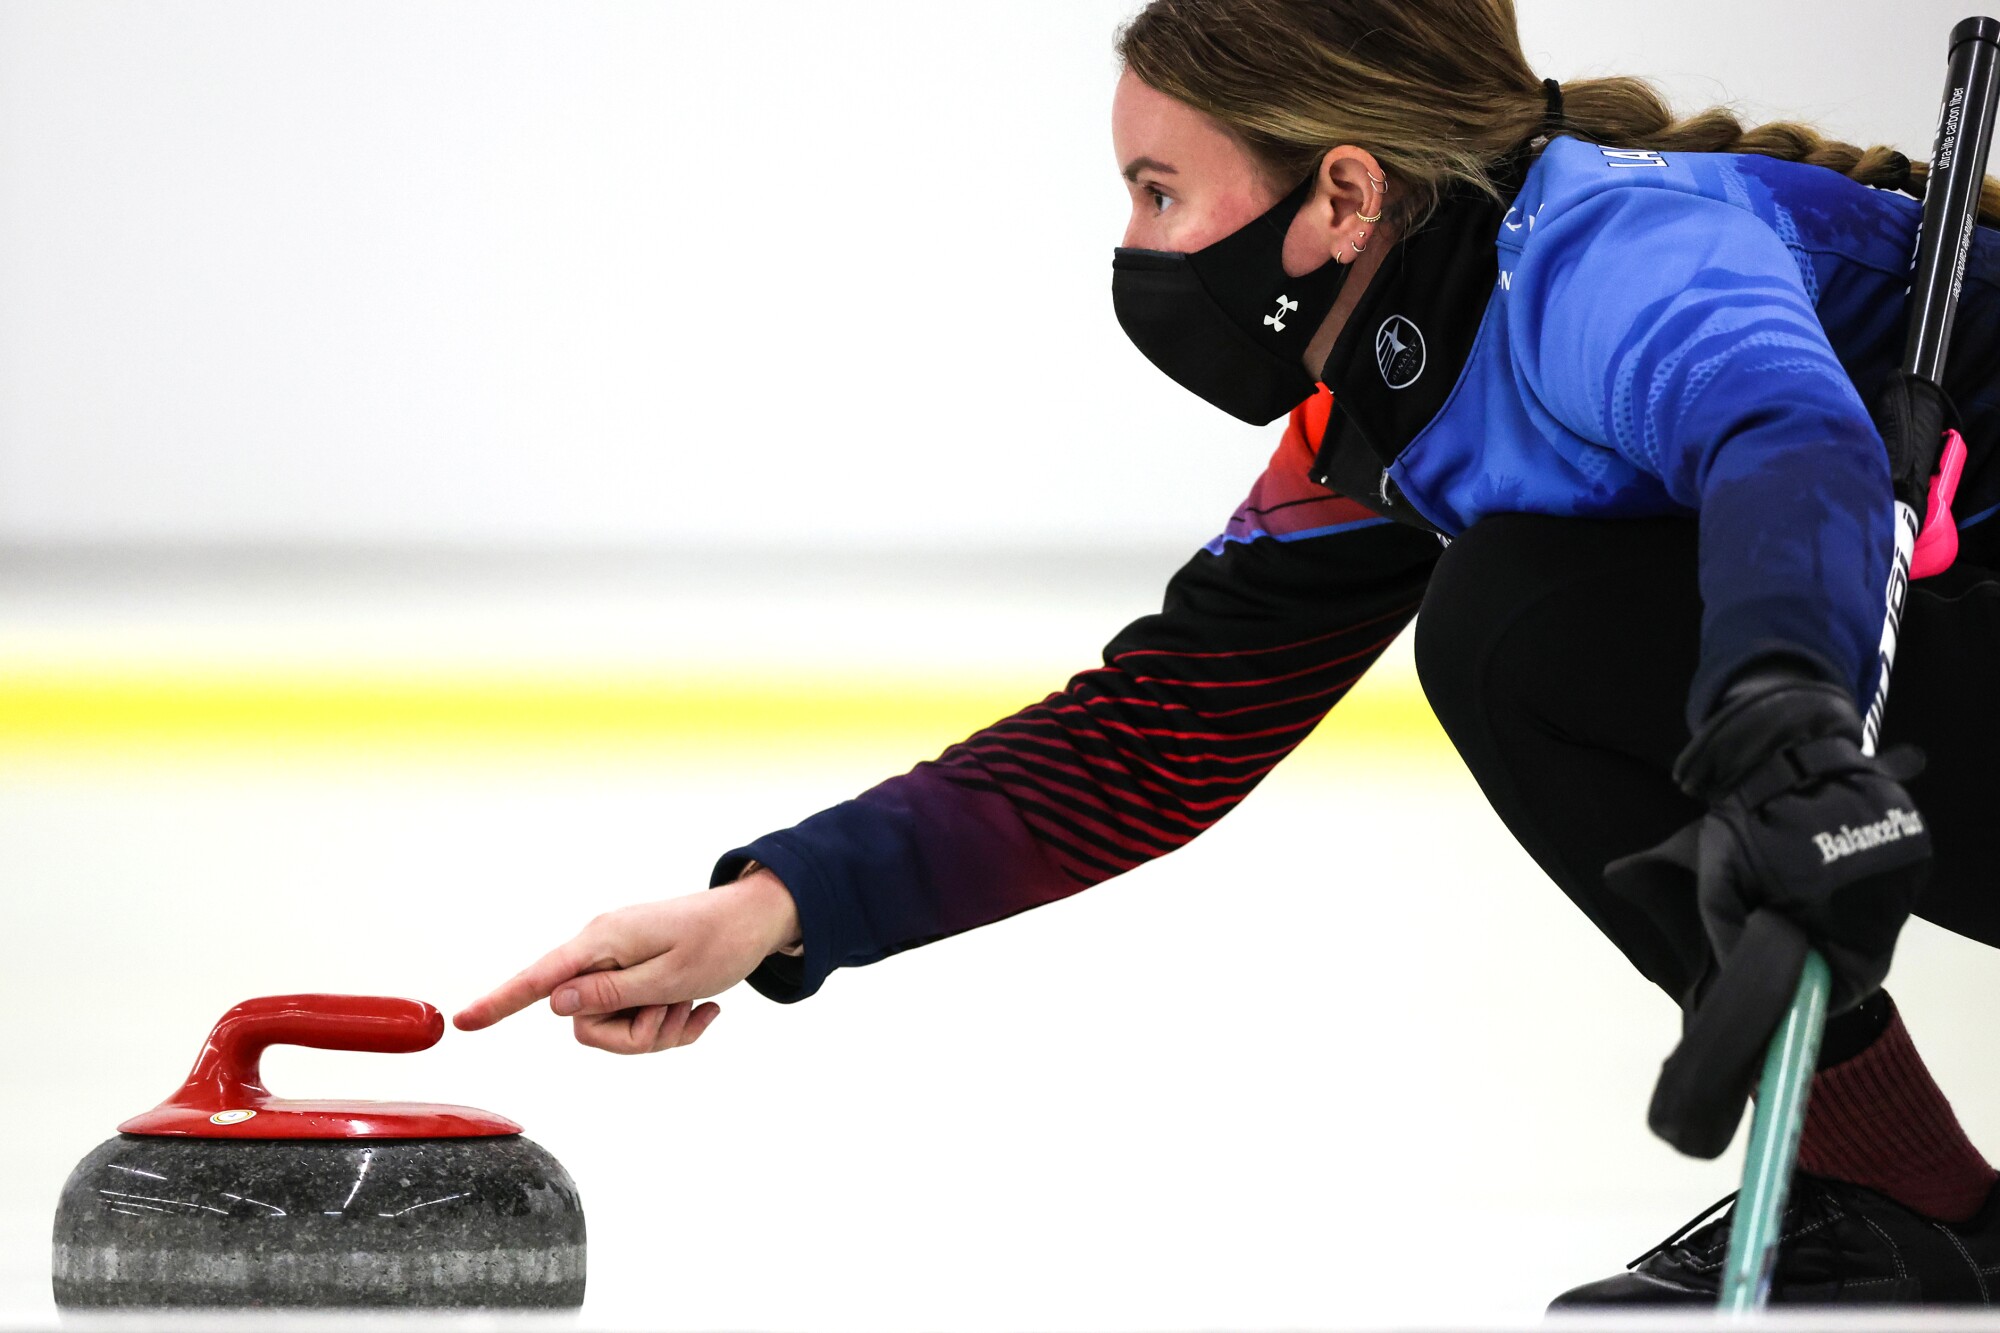 Amanda Landrian Gonzalez pushes off to throw a stone during Hollywood Curling Club league night.